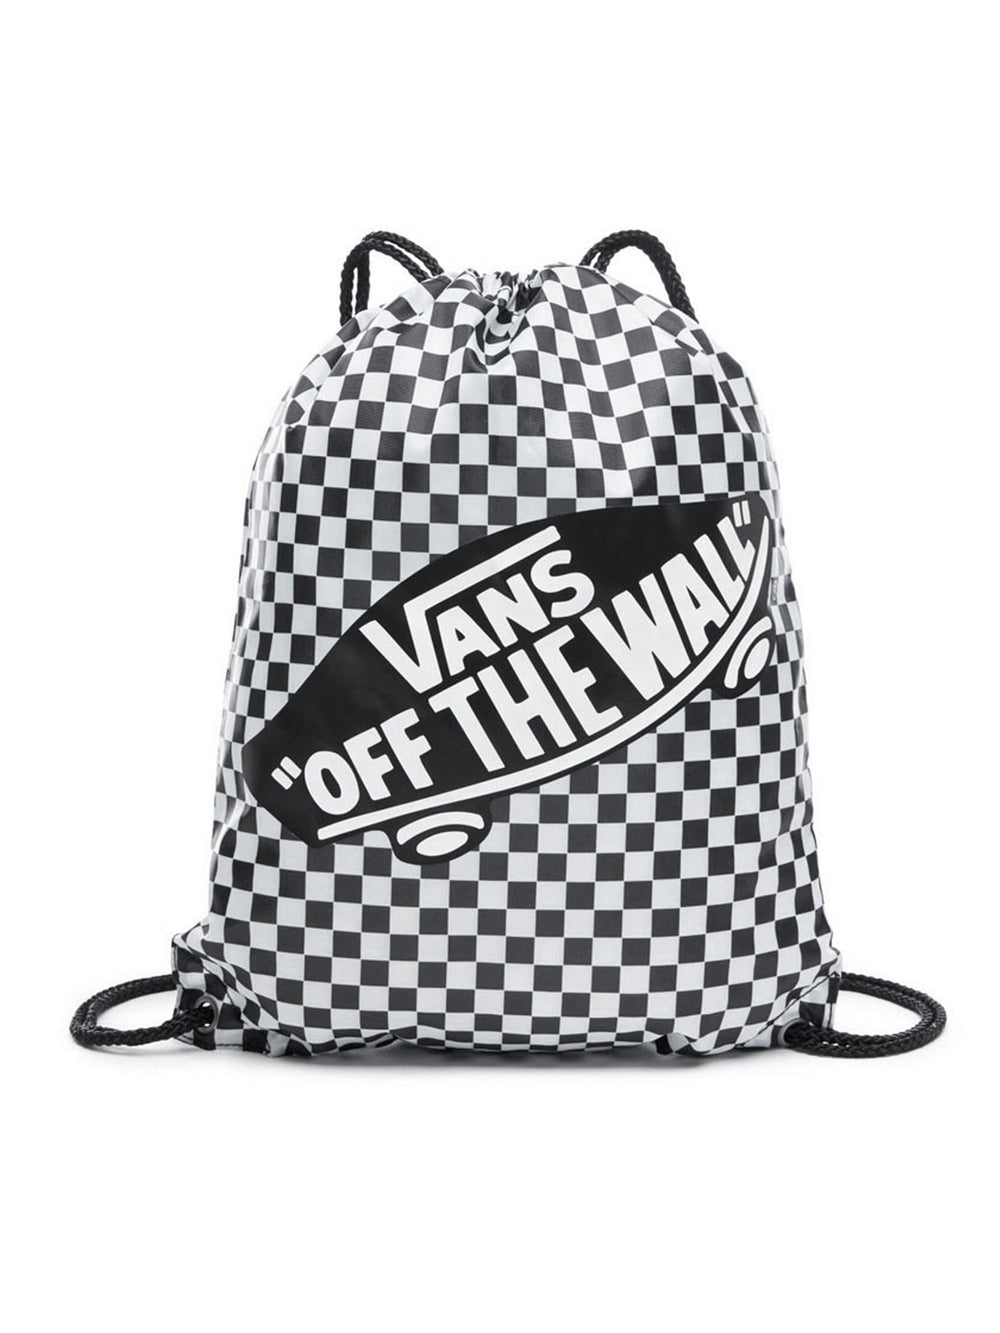 VANS BENCHED BAG - CHECKER - CLEARANCE